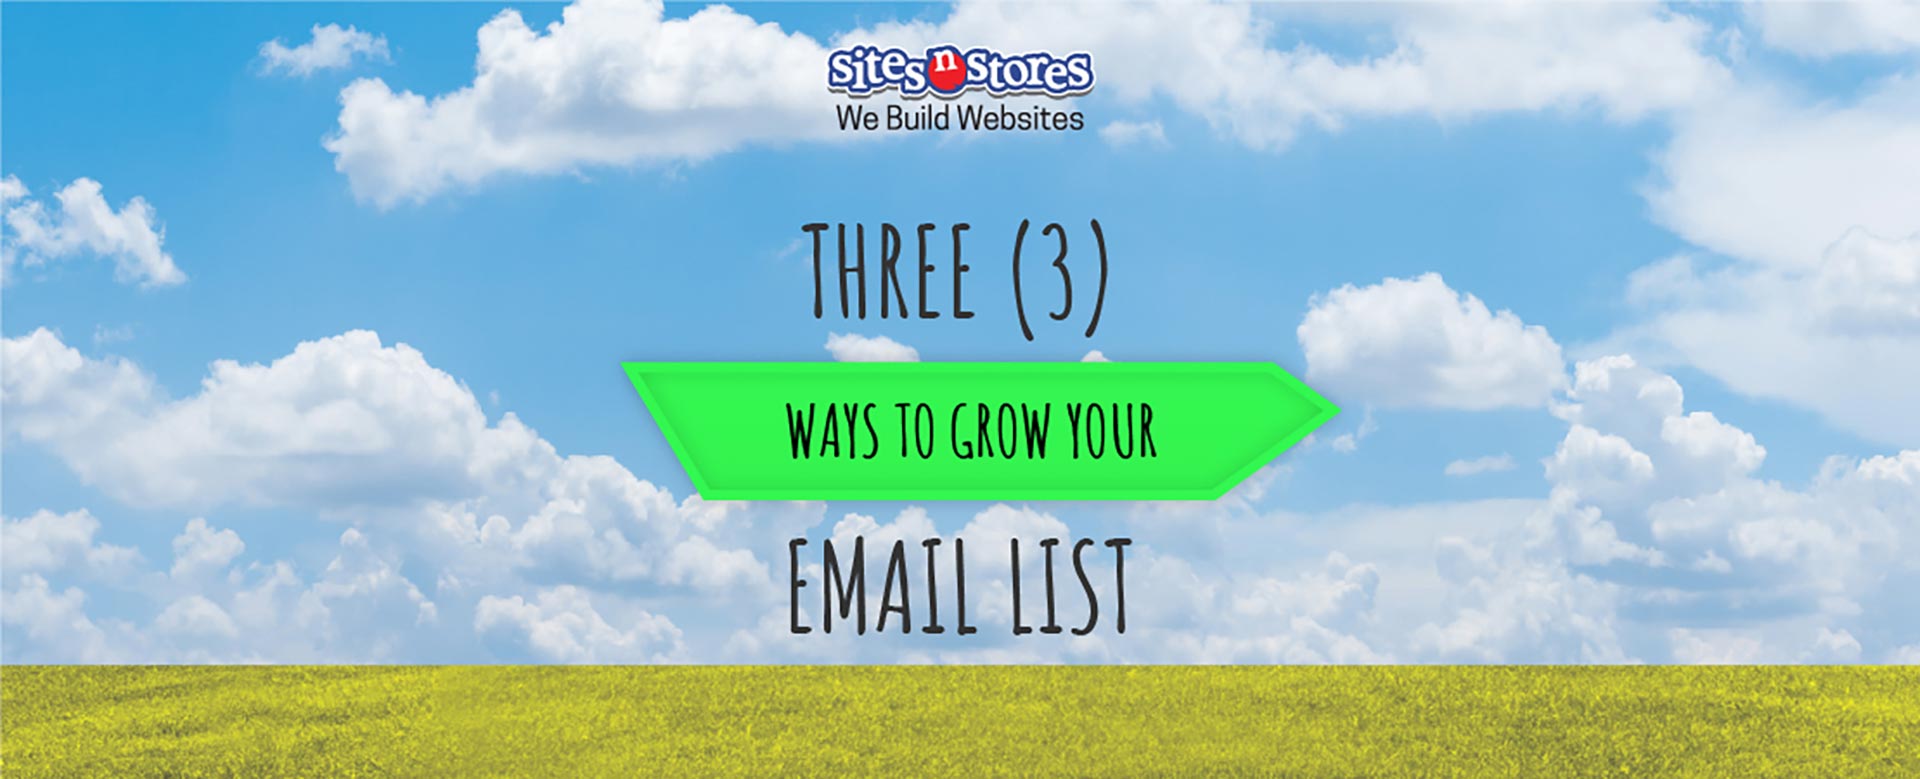 3 Ways to Grow Your Email List